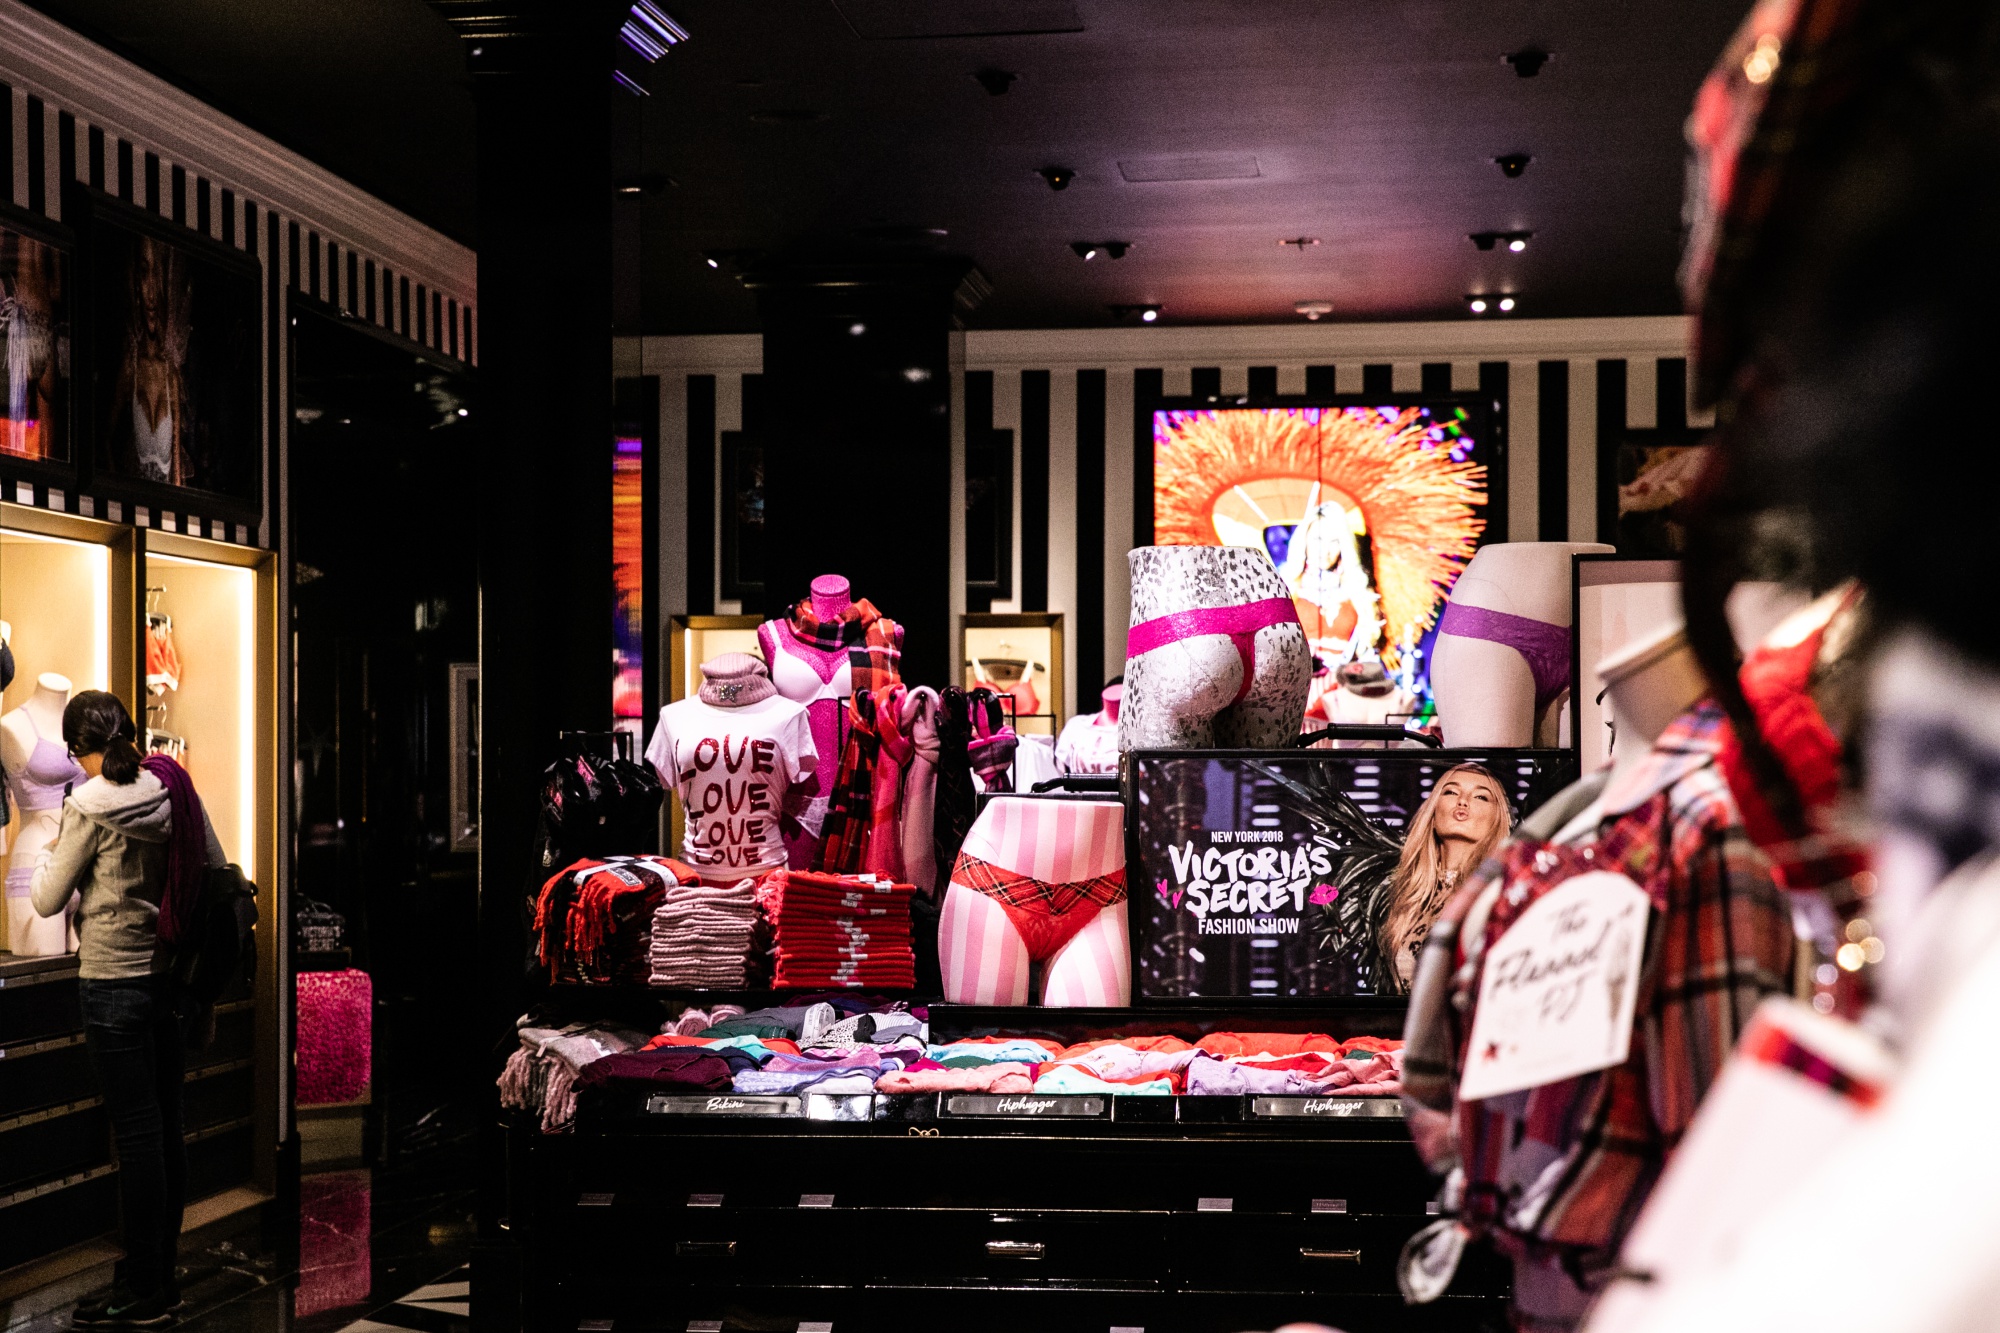 Victoria's Secret Hires CEO From Tory Burch to Lead Turnaround - Bloomberg